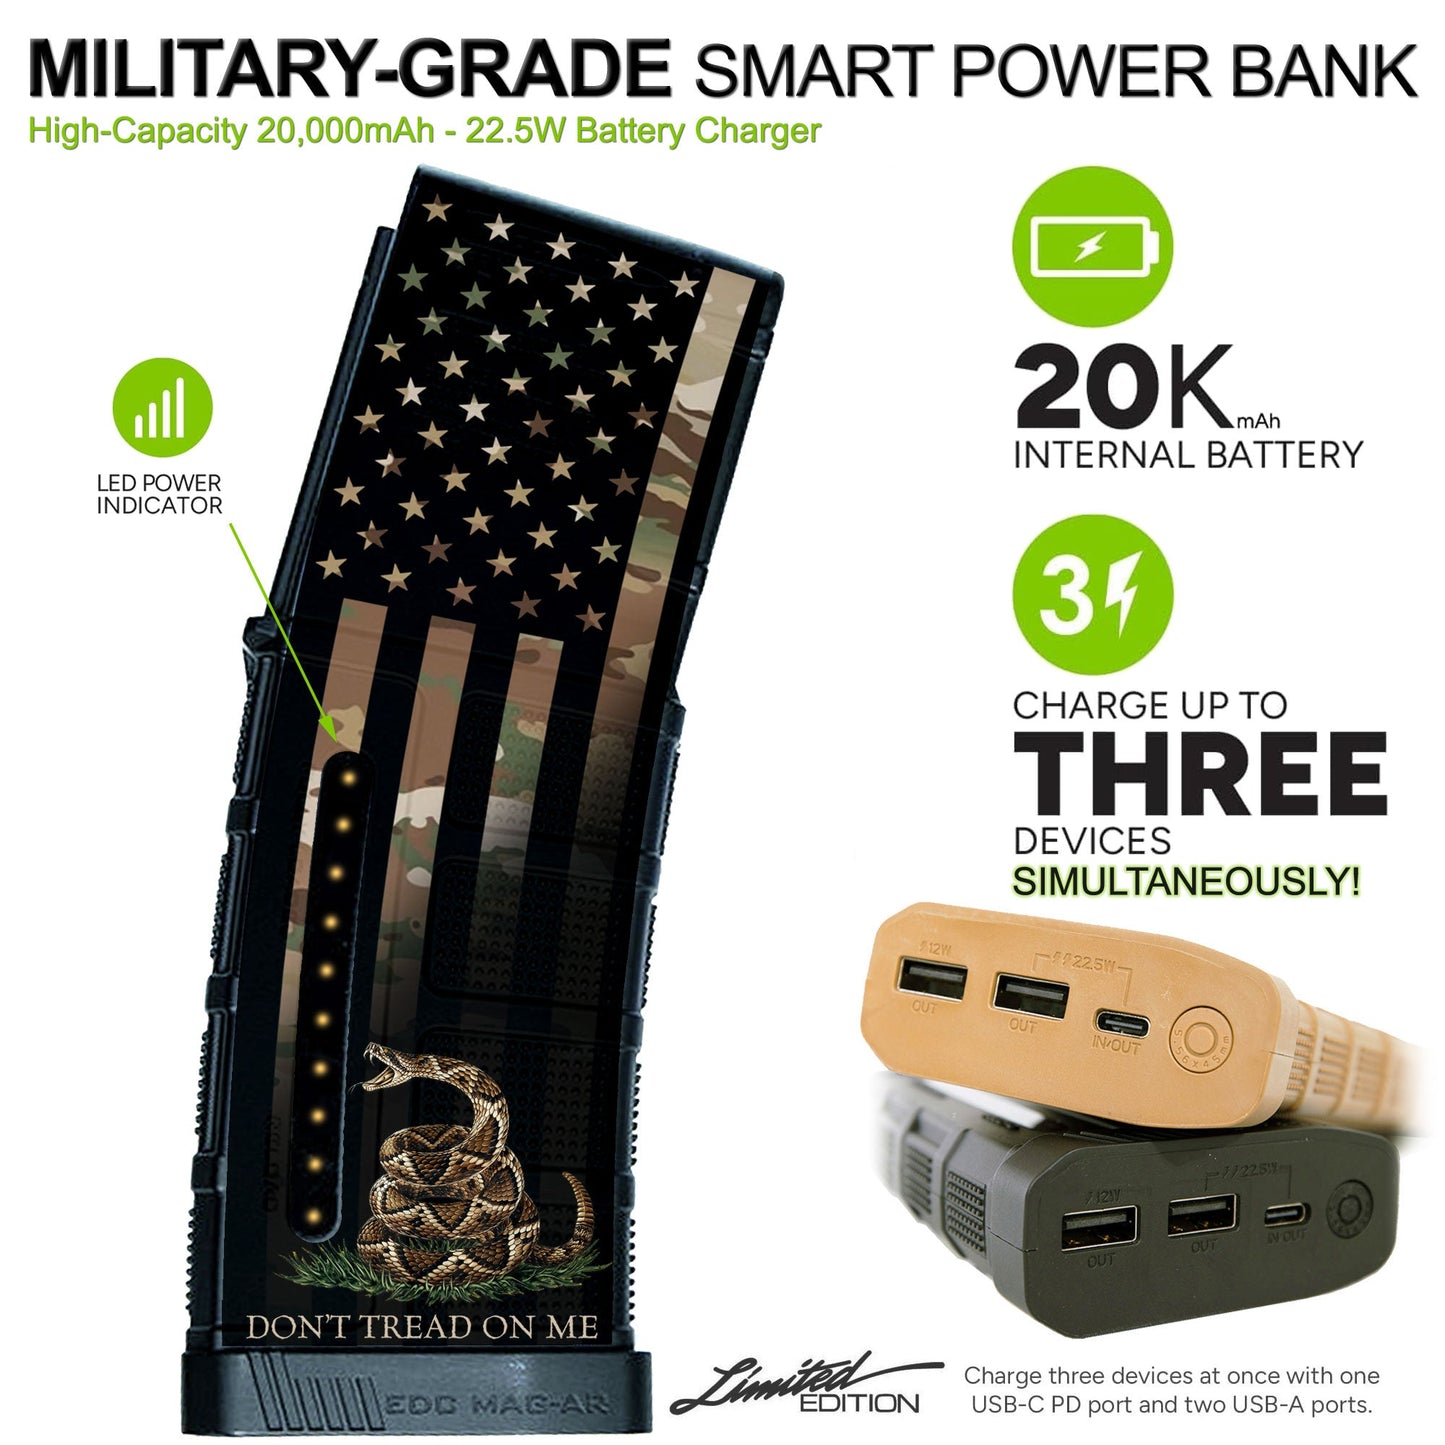 Limited Edition Custom Printed 20,000mAh Military Grade Smart Powerbank Battery Charger with 2-USB + USB-C Ports